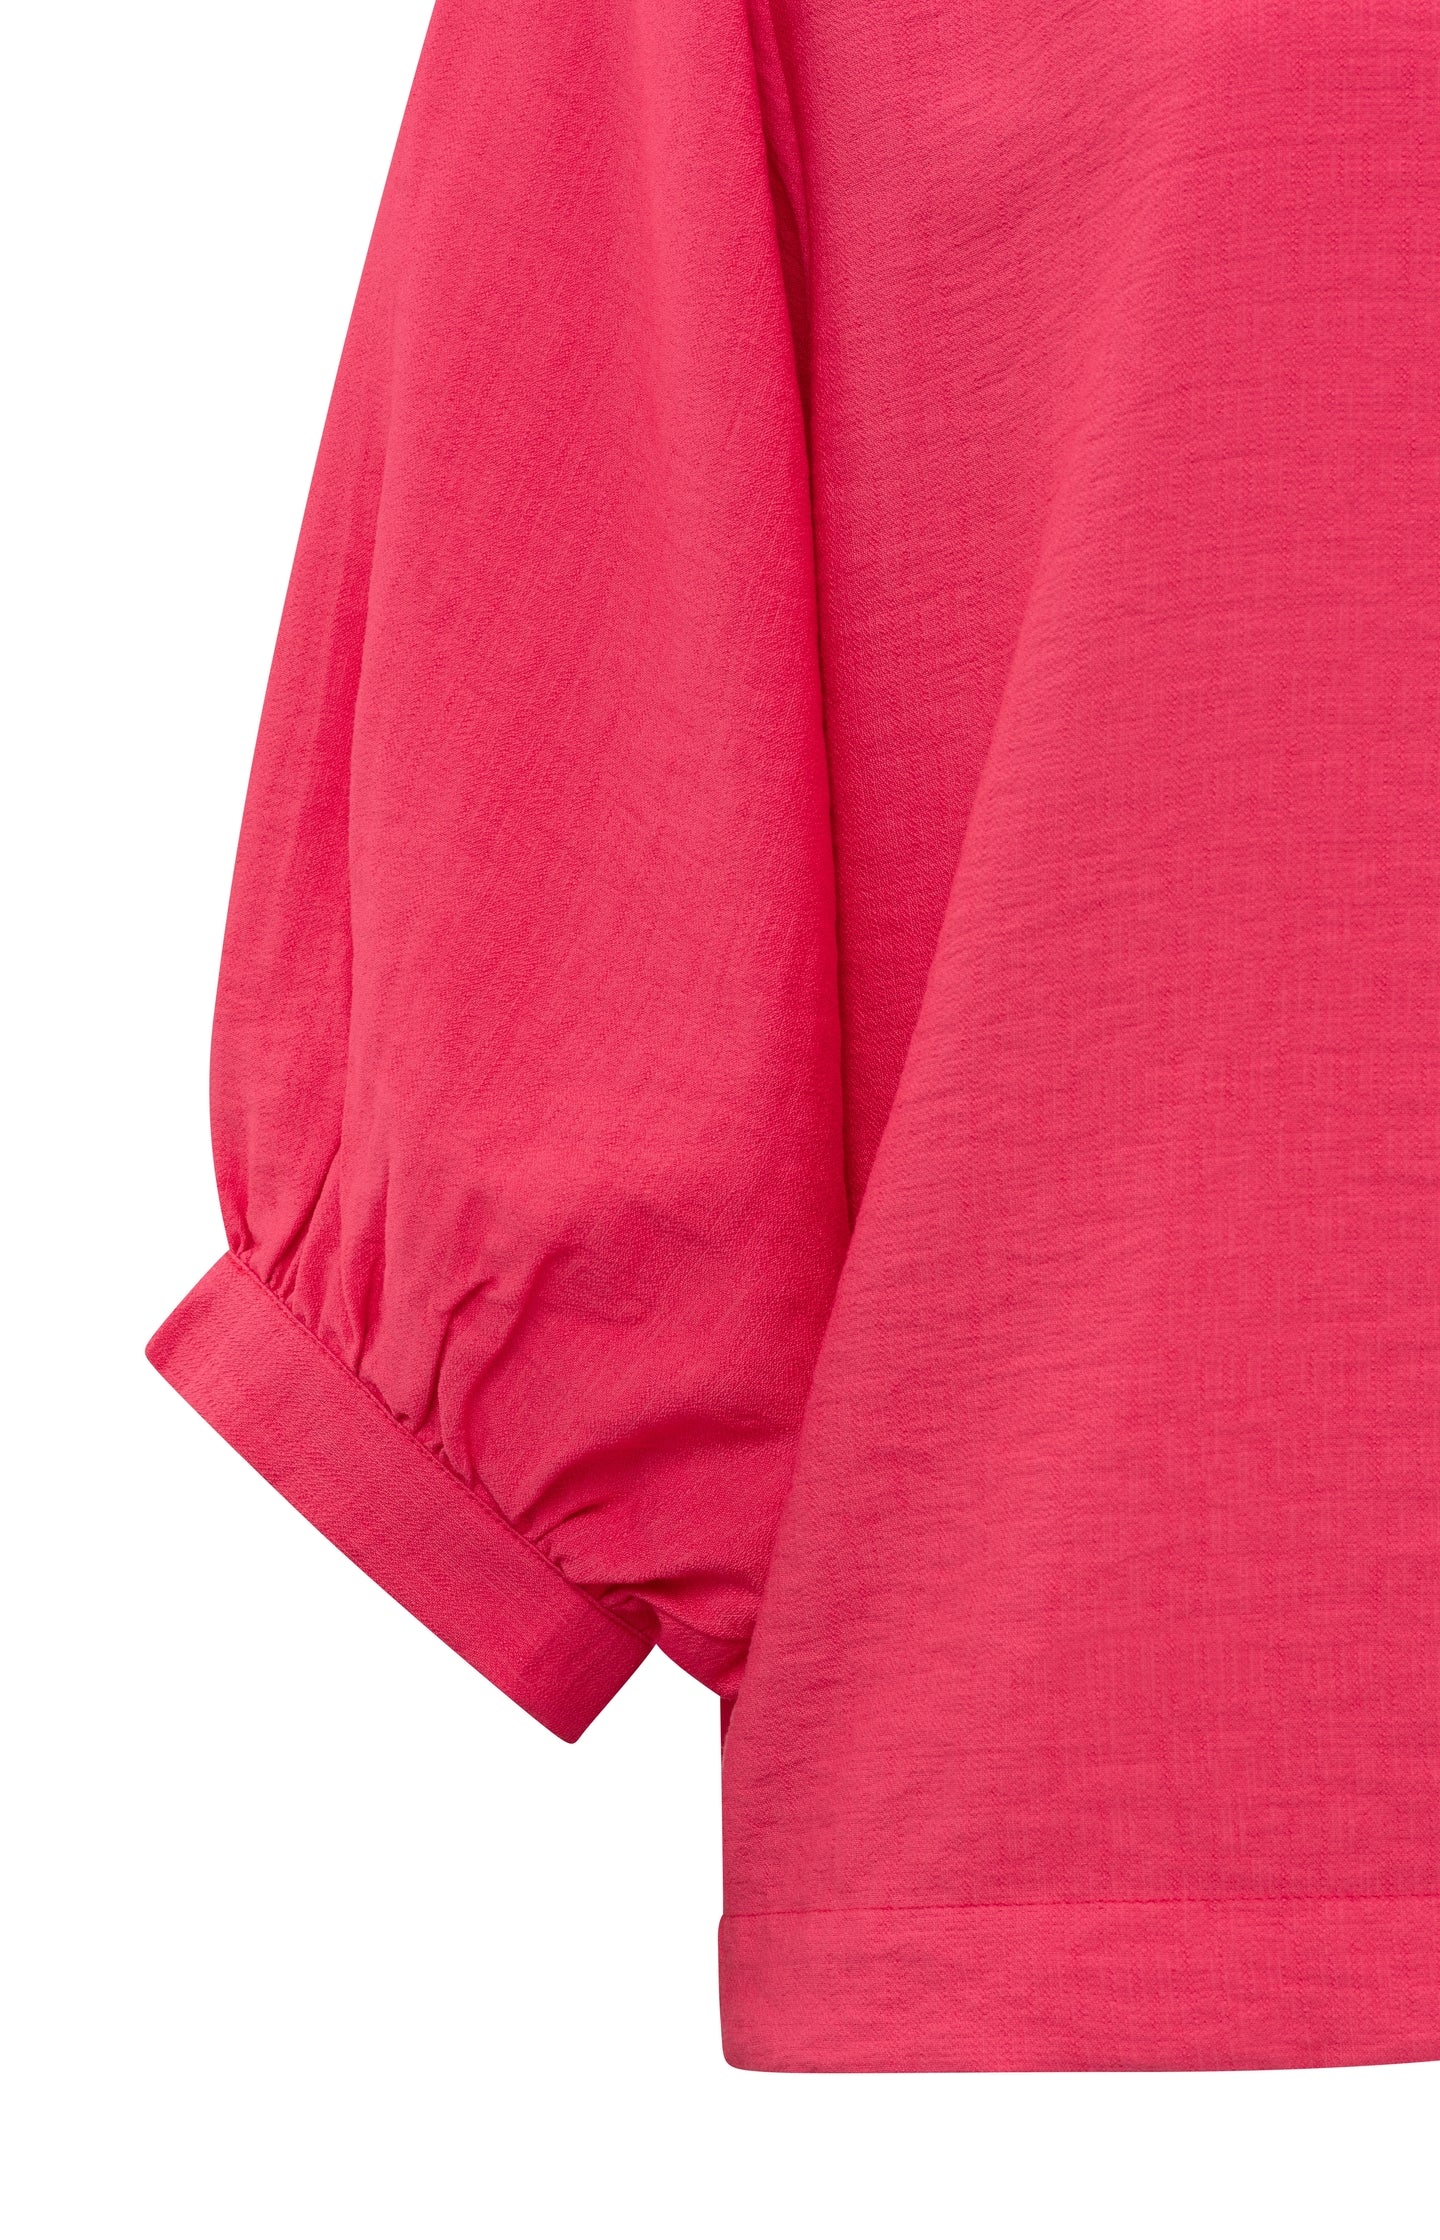 Batwing top with boatneck and long sleeves in wide fit